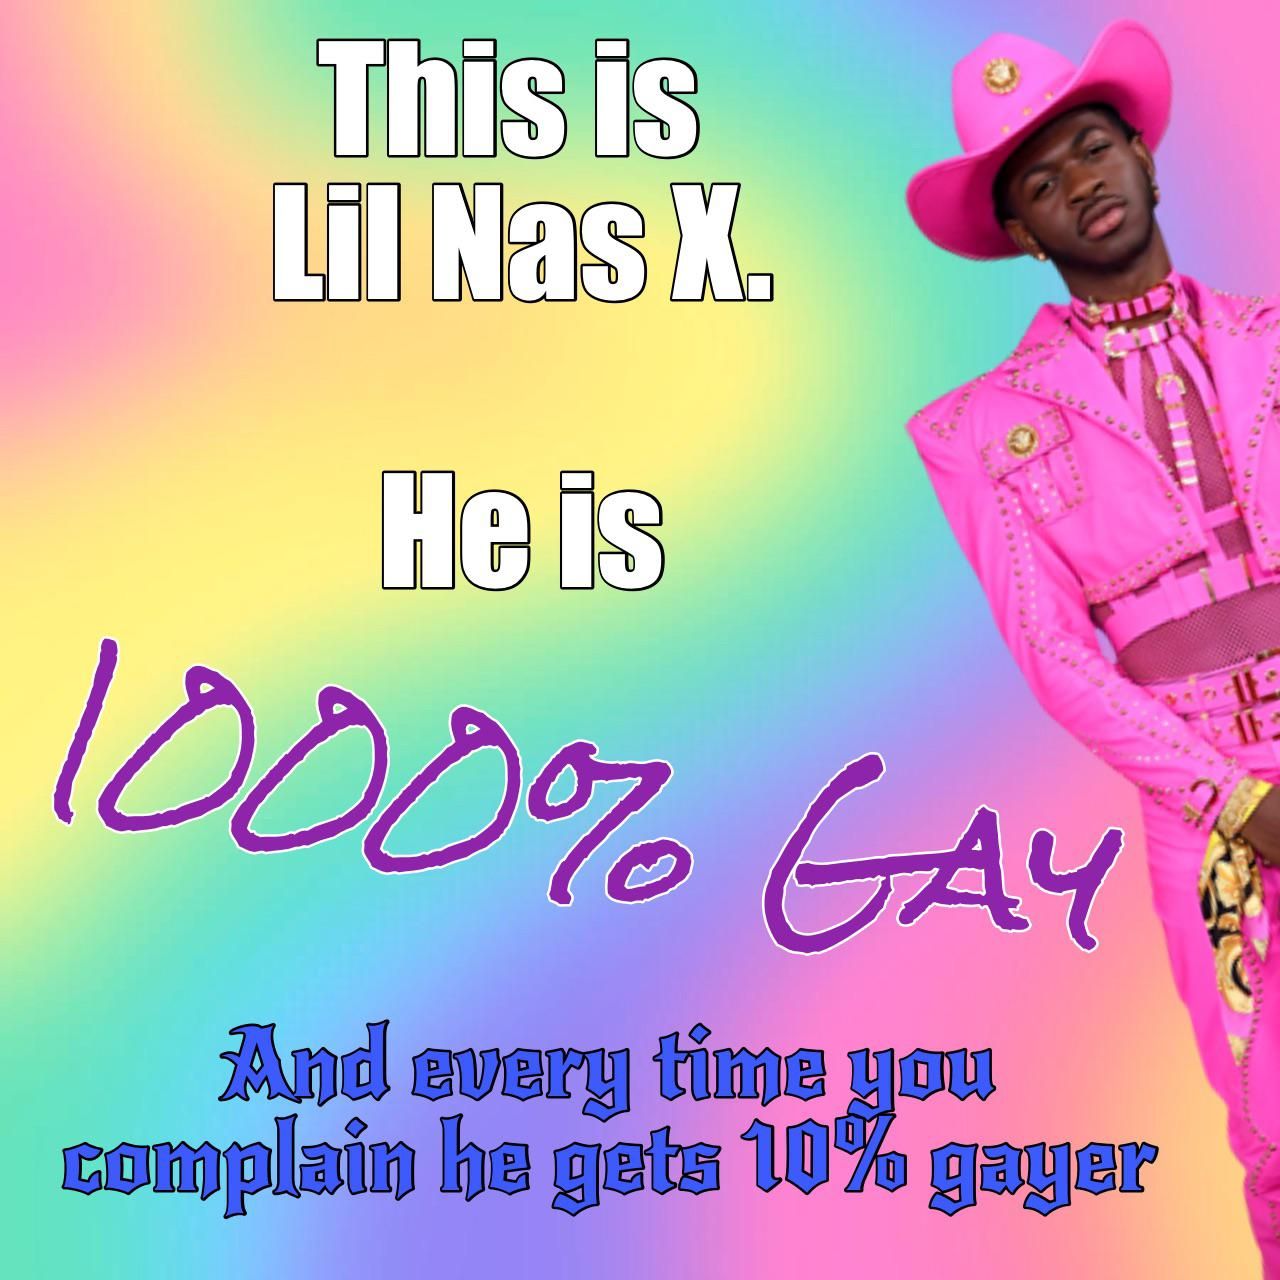 He only grows more gay. You cannot stop it.